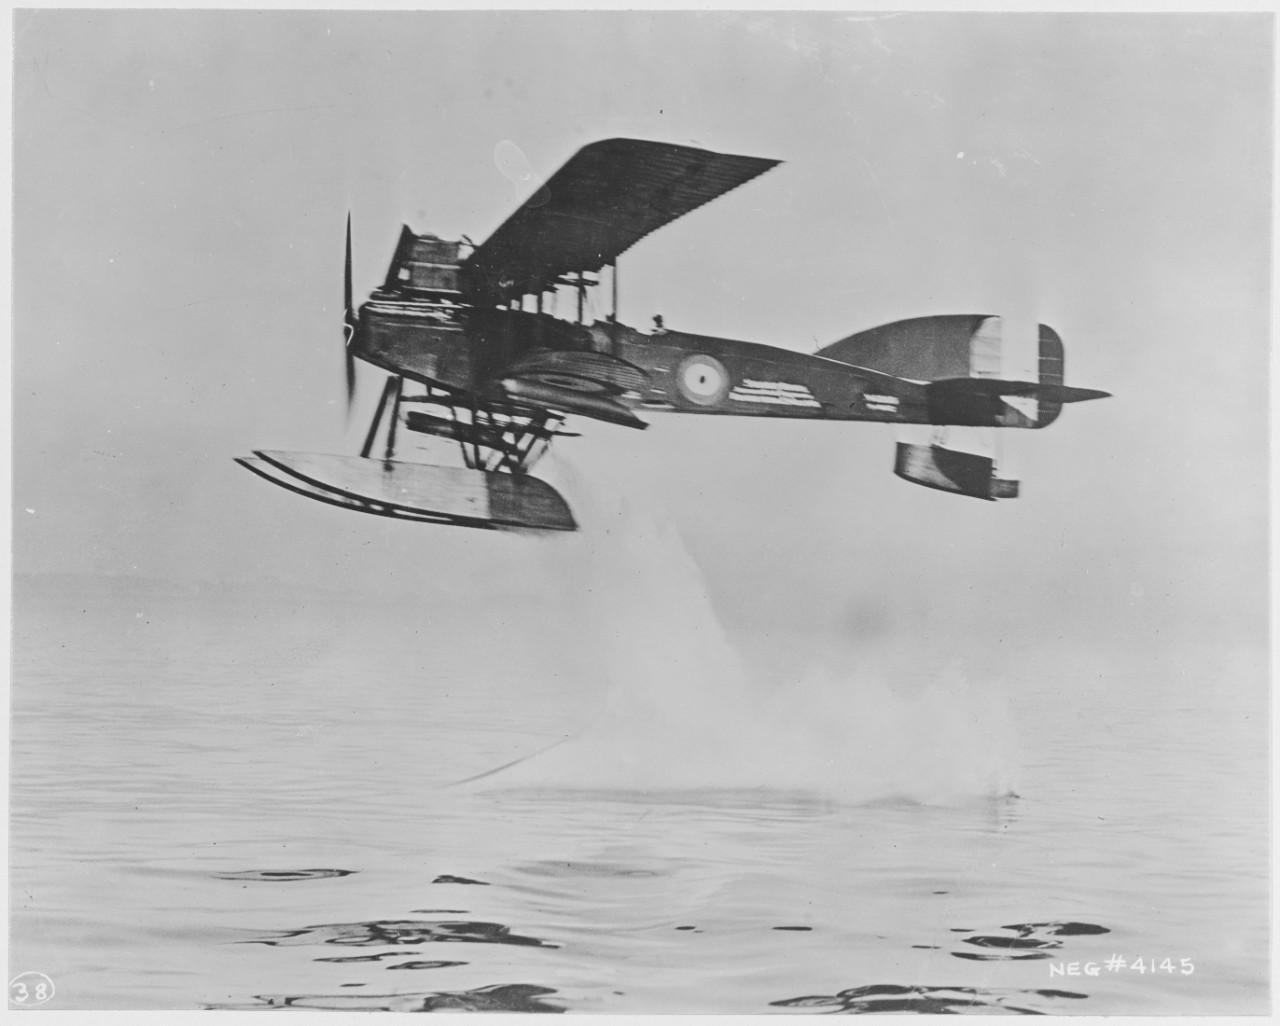 British aeroplane flying over spot where aerial torpedo just exploded